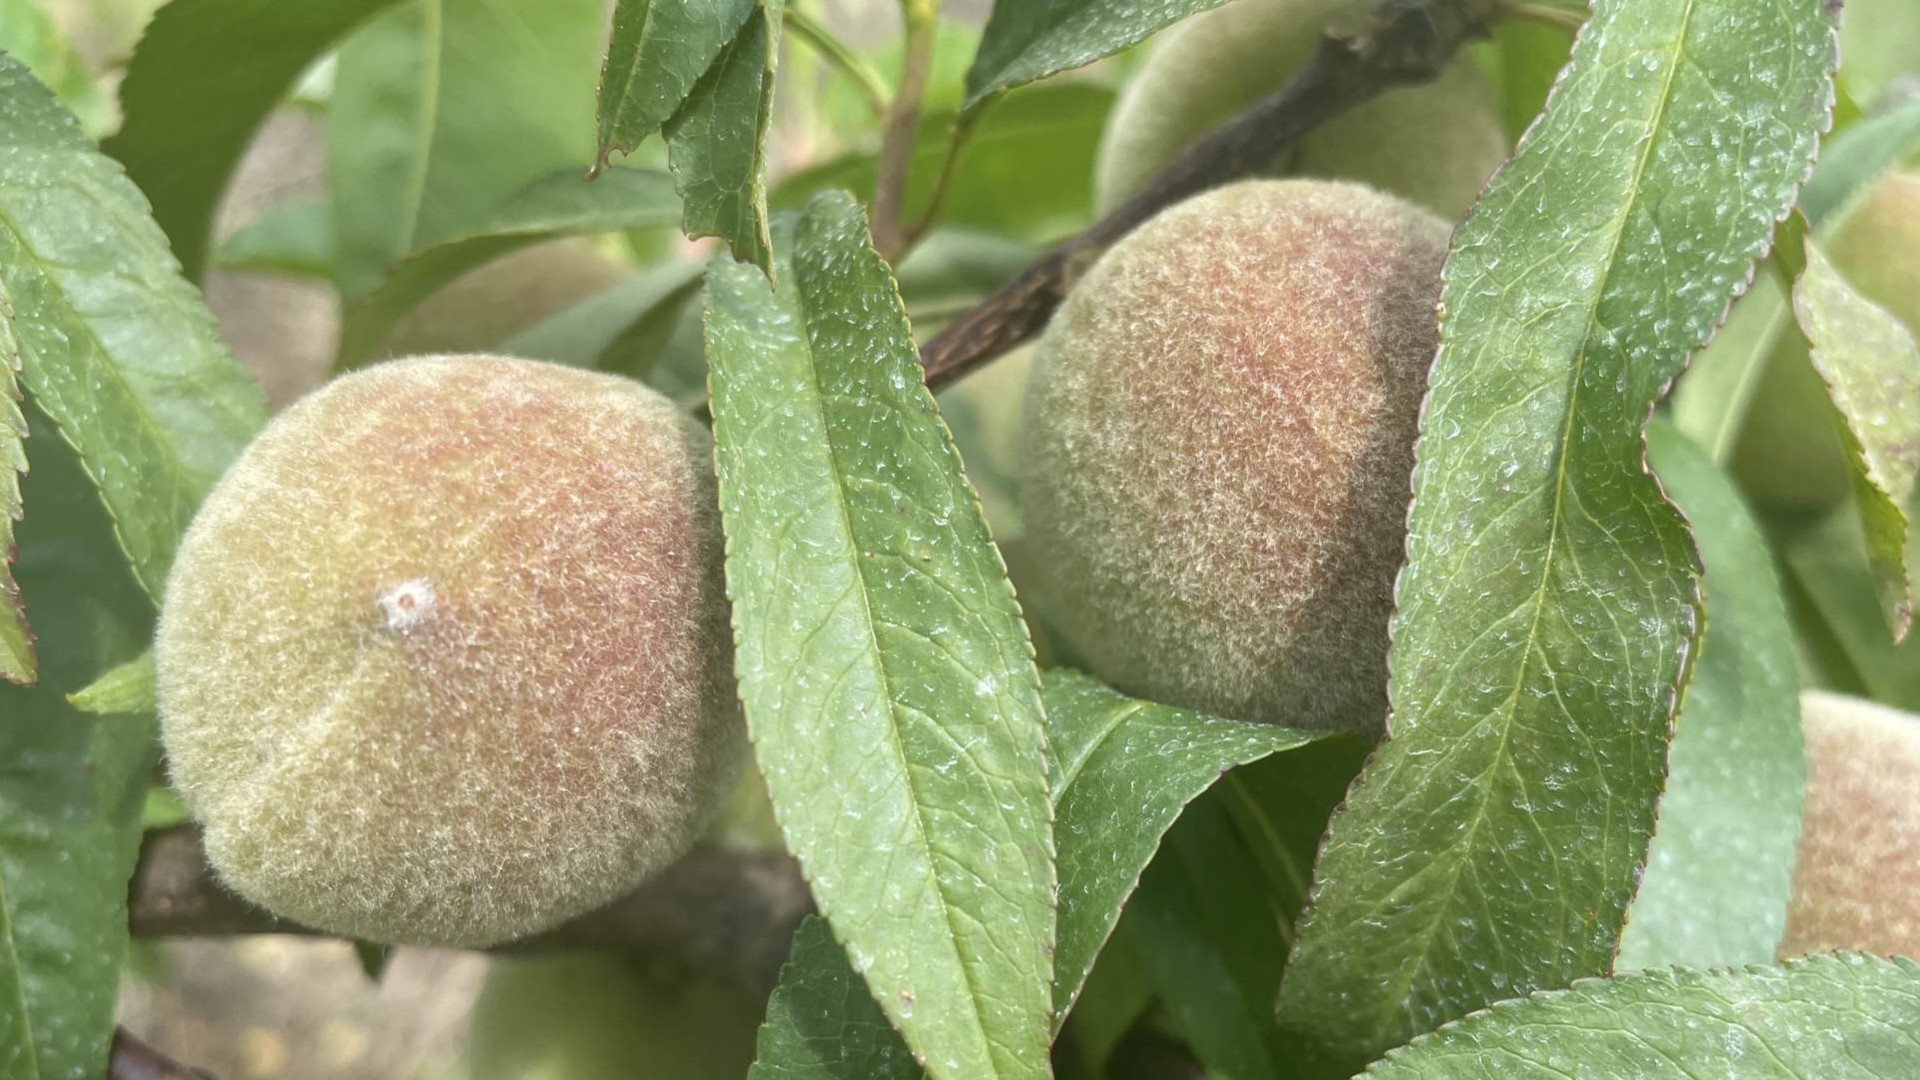 The beloved Peach State did not have enough cold hours to produce enough peach varieties in this year's crop.